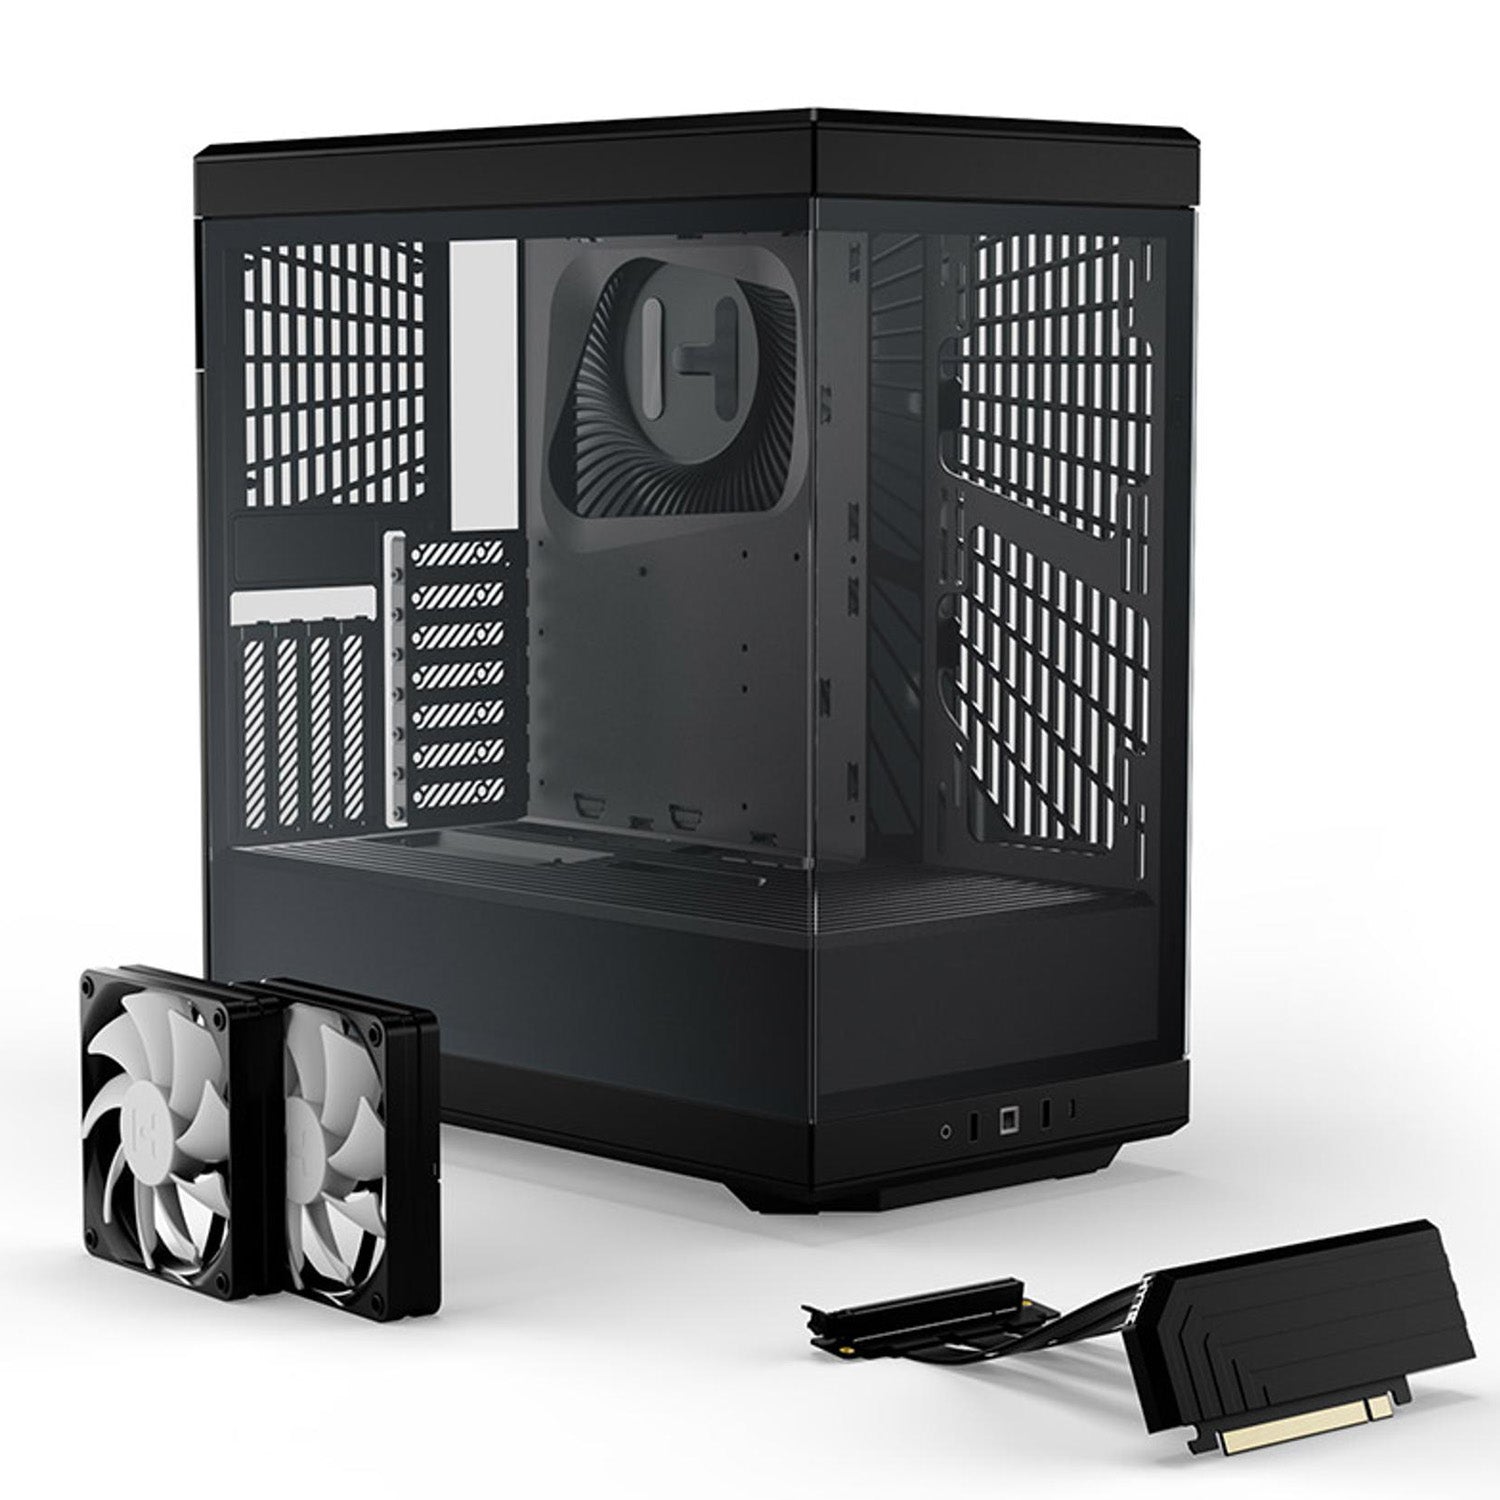 HYTE Y40 | ATX Tempered Glass Case (Black)